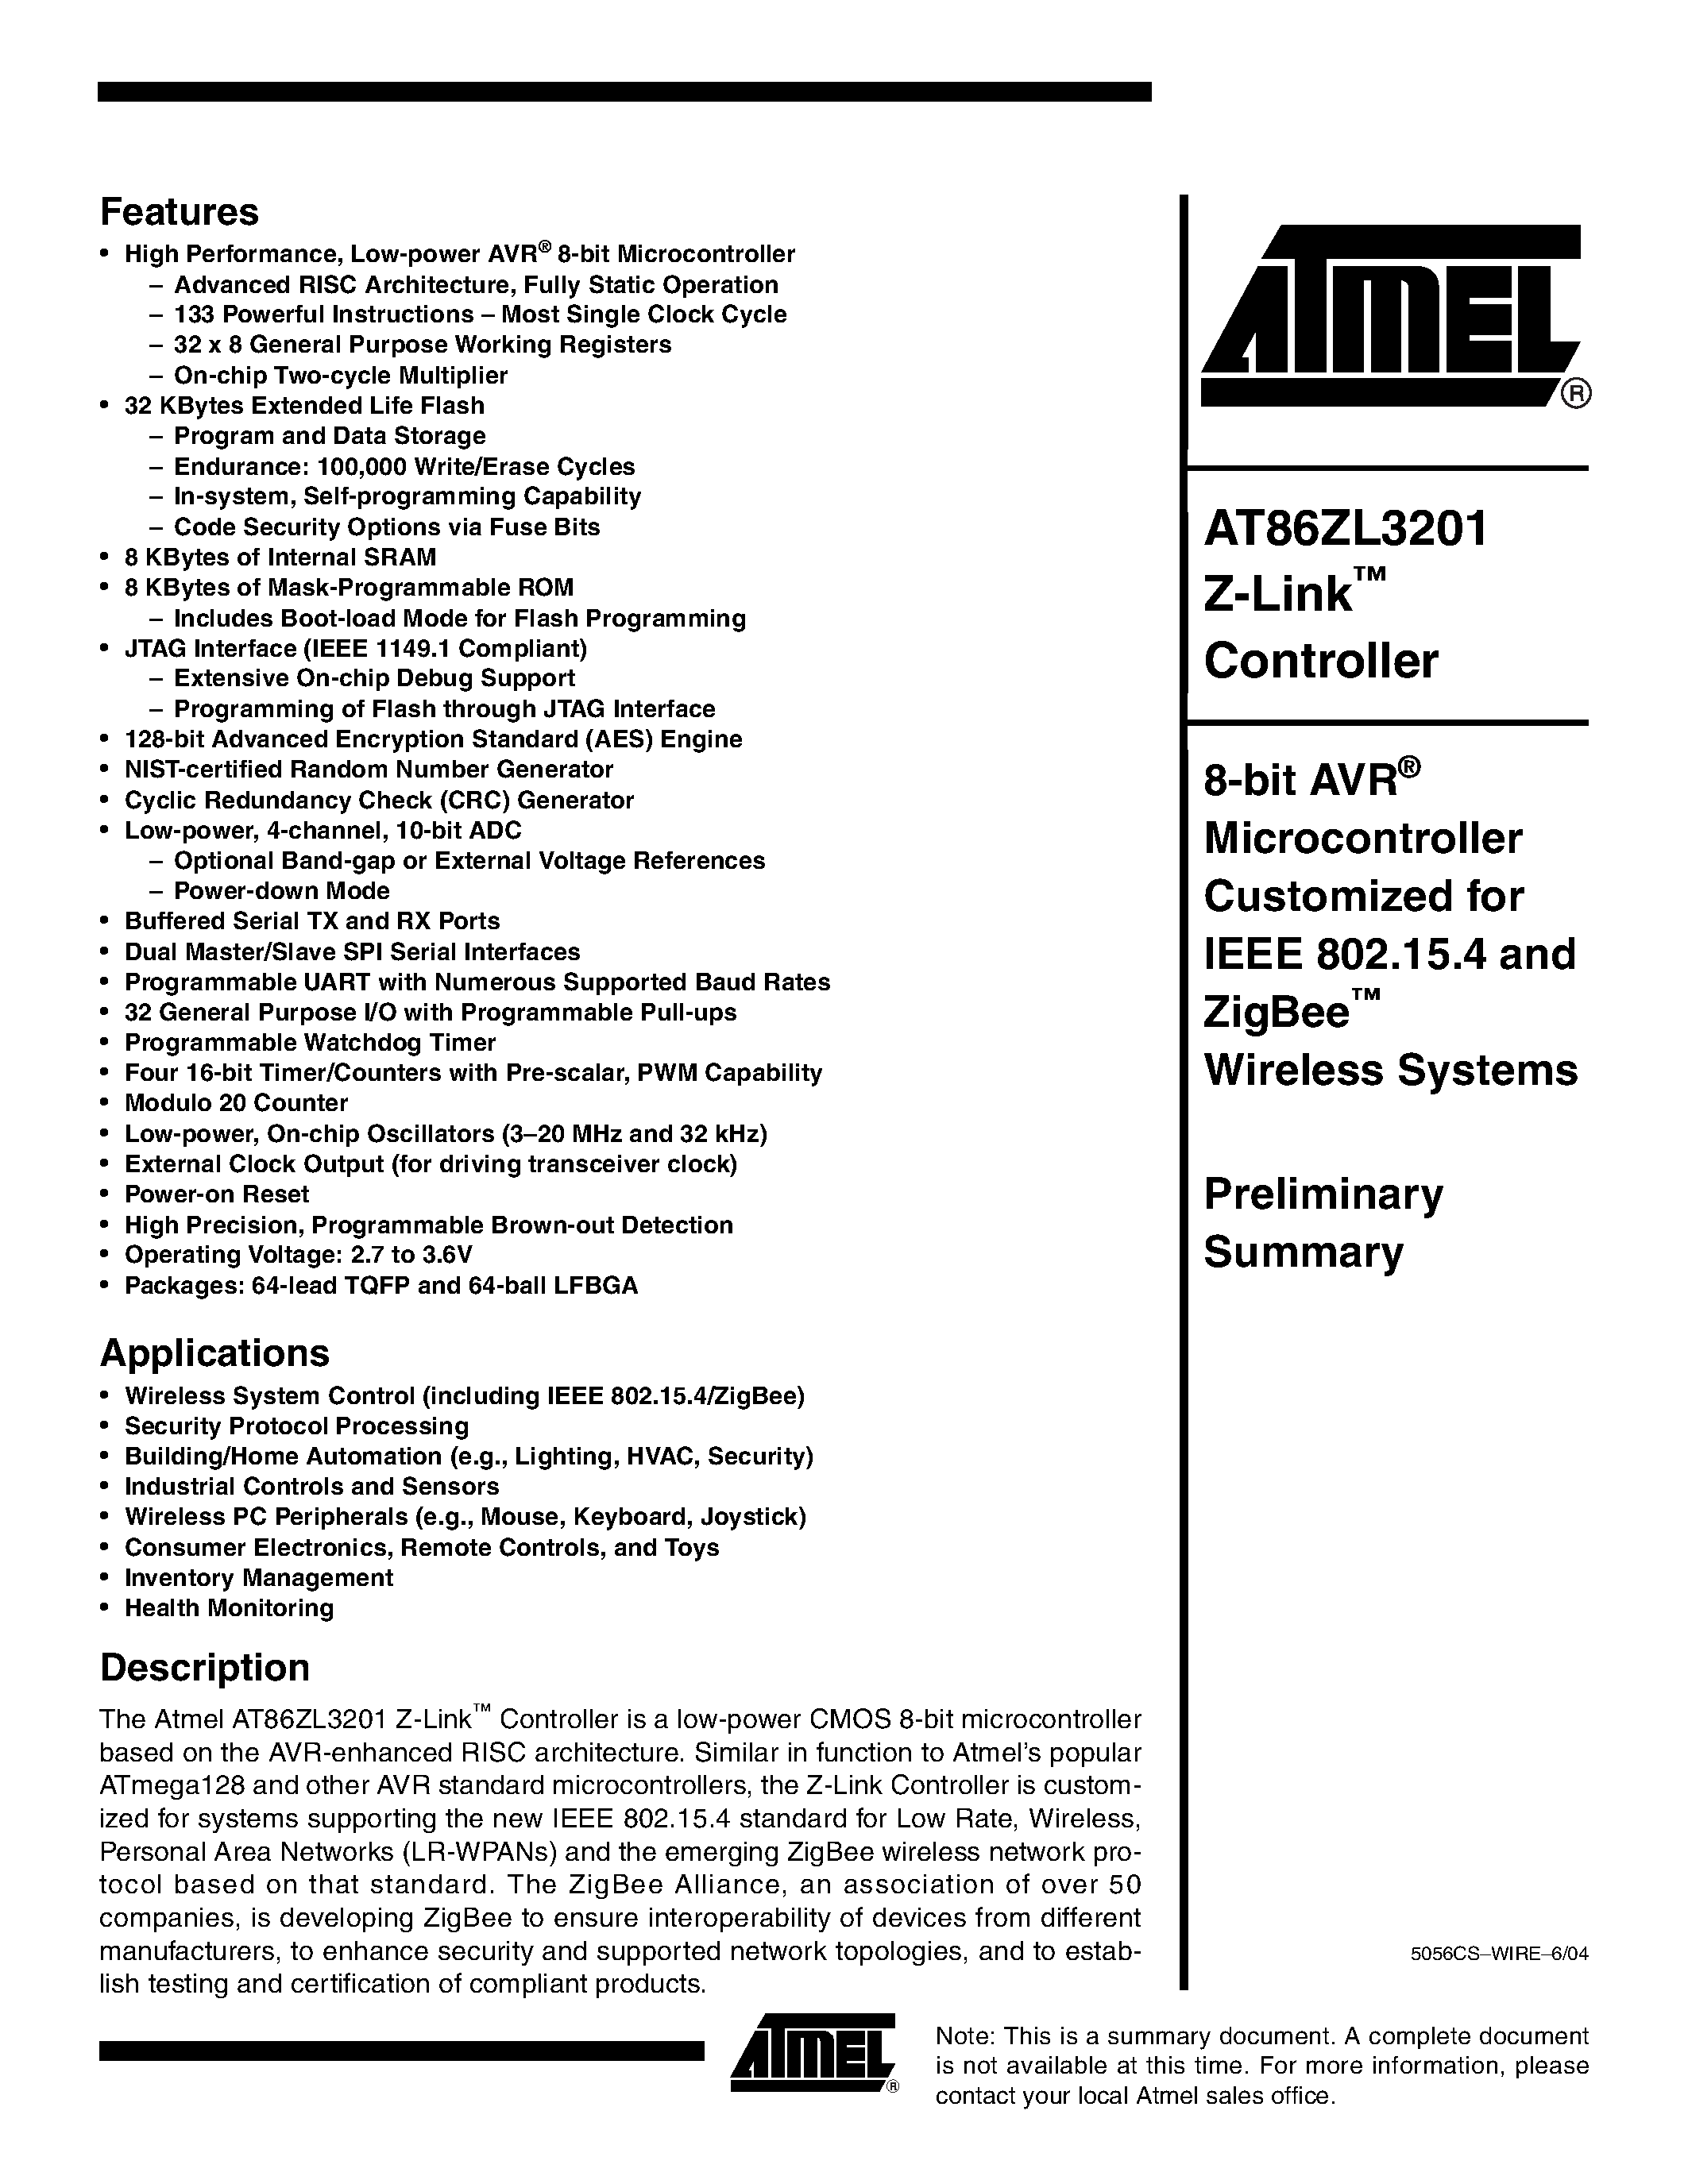 Datasheet AT86ZL3201 - AT86ZL3201 Z-Link Controller Customized for IEEE 802.15.4 and ZigBee Wireless Systems page 1